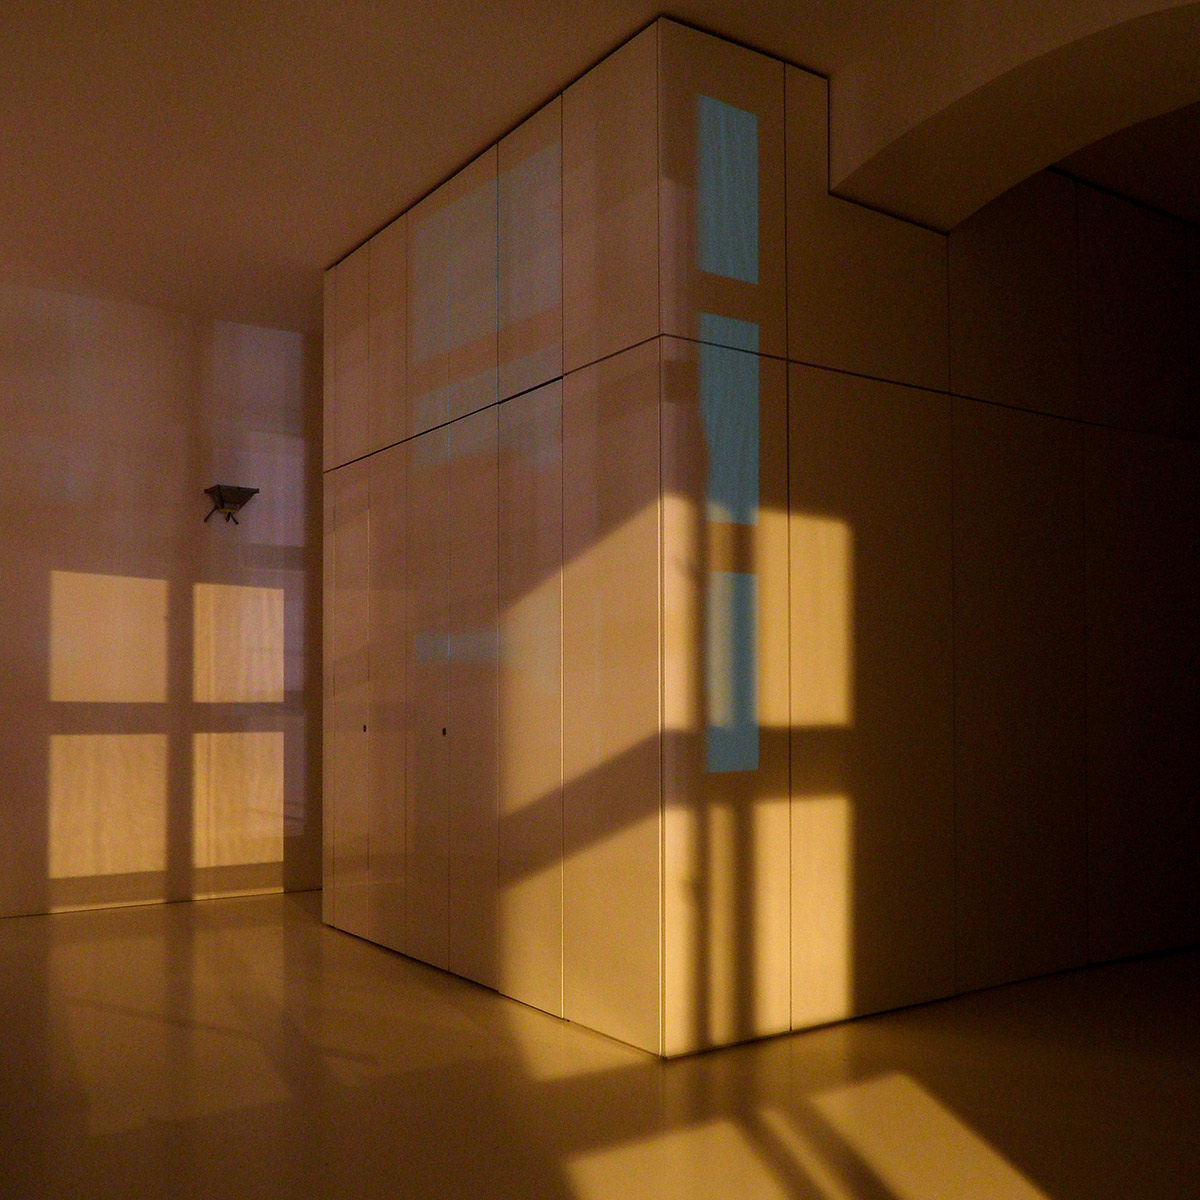 André Werner White Cube Nightshot Blue, Vienna 2014. Long exposure photography of the unlit Studio 513 at MuseumsQuartier, Vienna.